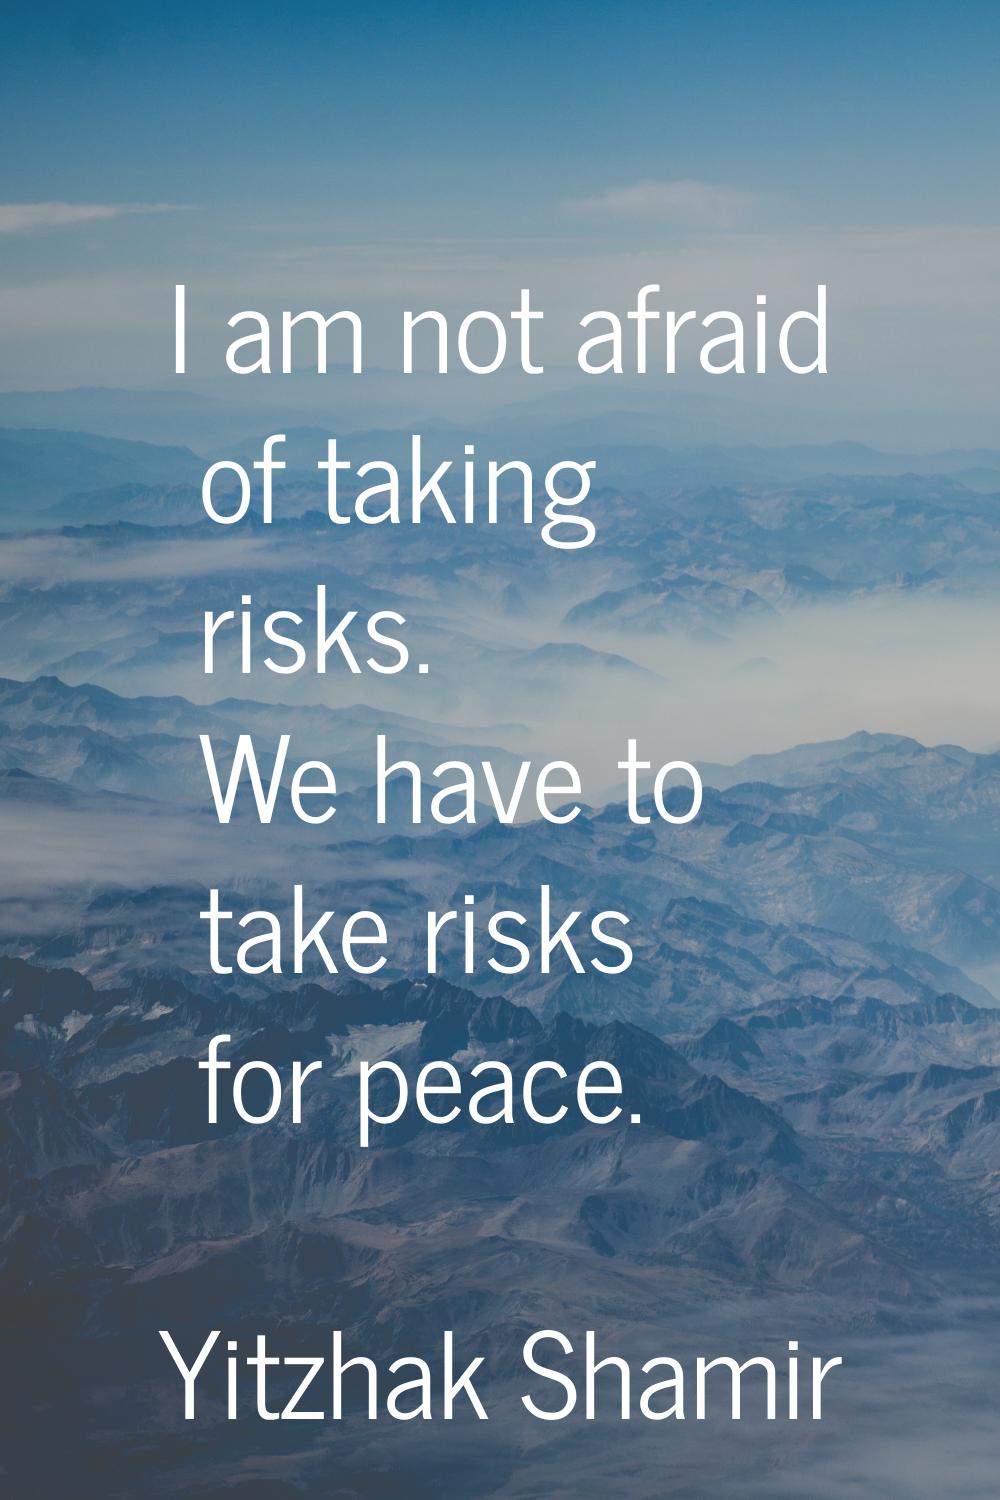 I am not afraid of taking risks. We have to take risks for peace.